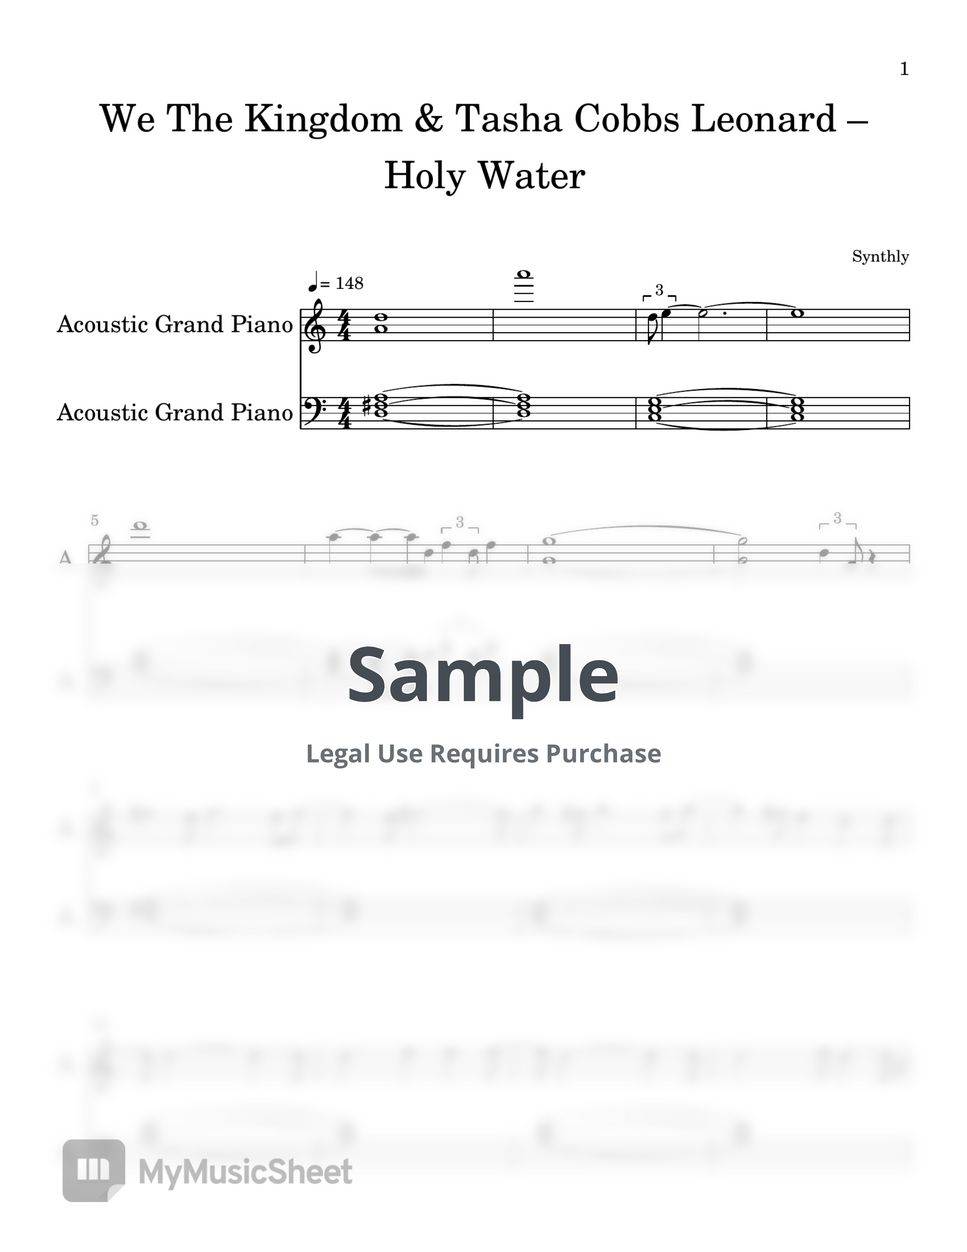 We The Kingdom ft Tasha Cobbs - Holy Water (EASY PIANO SHEET) by Synthly